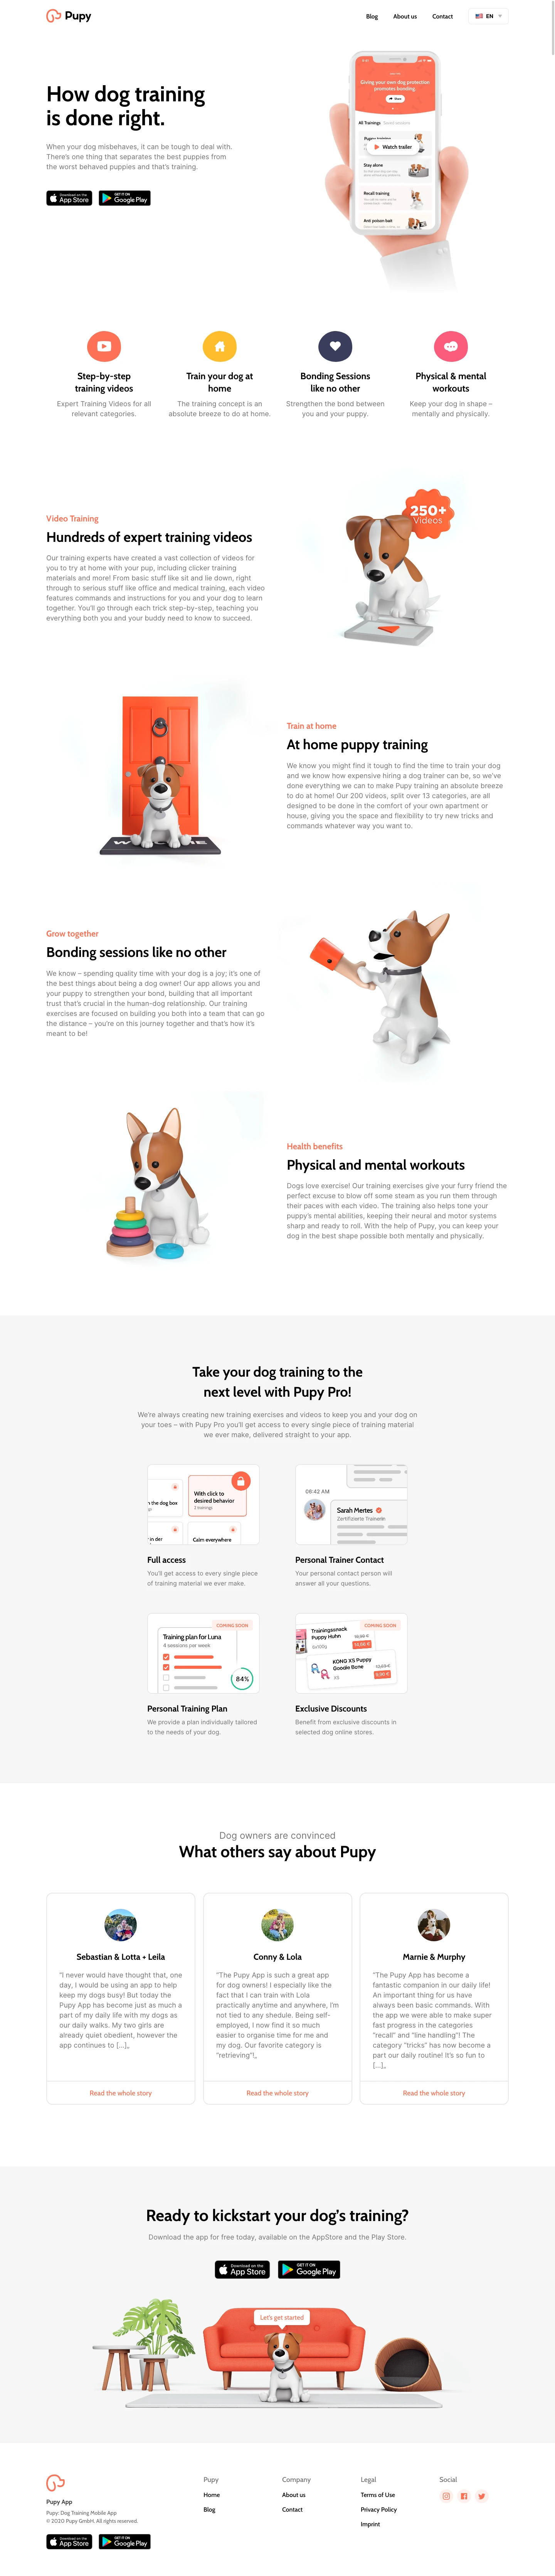 Pupy Landing Page Example: How dog training is done right. When your dog misbehaves, it can be tough to deal with. There’s one thing that separates the best puppies from the worst behaved puppies and that’s training.